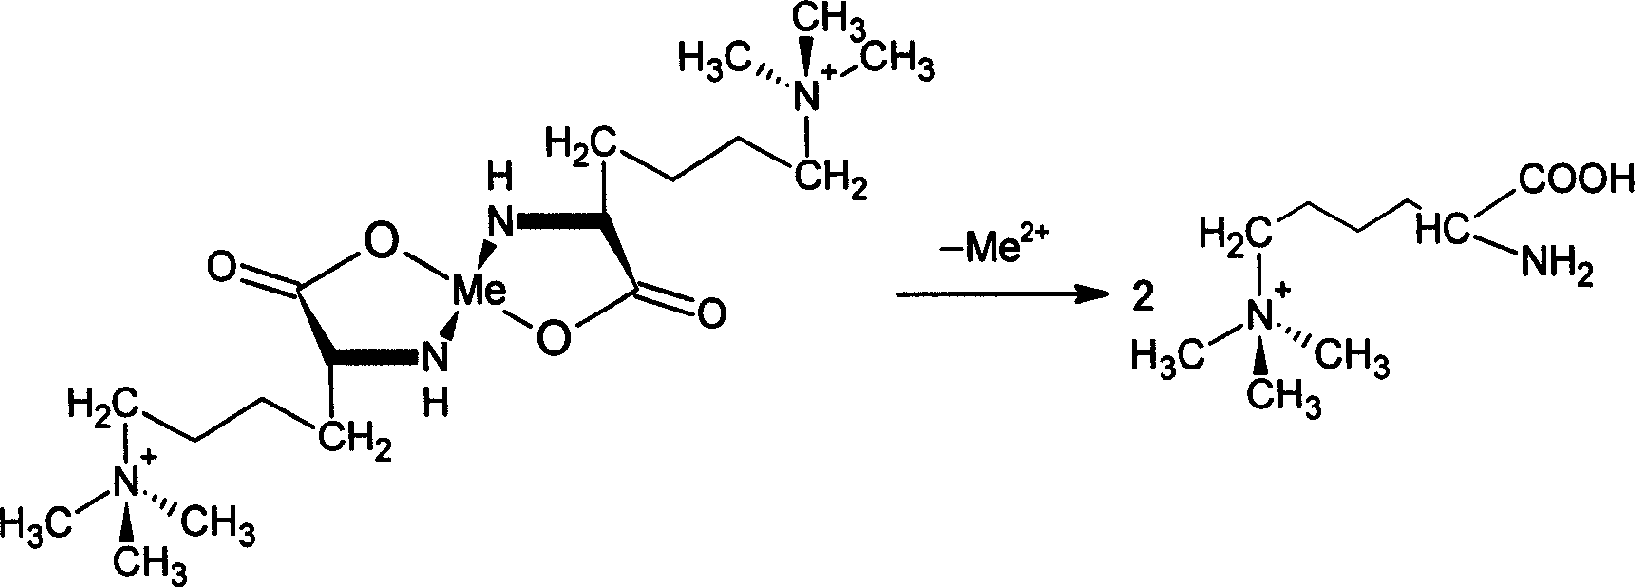 Clean method for producing high-purity laminine